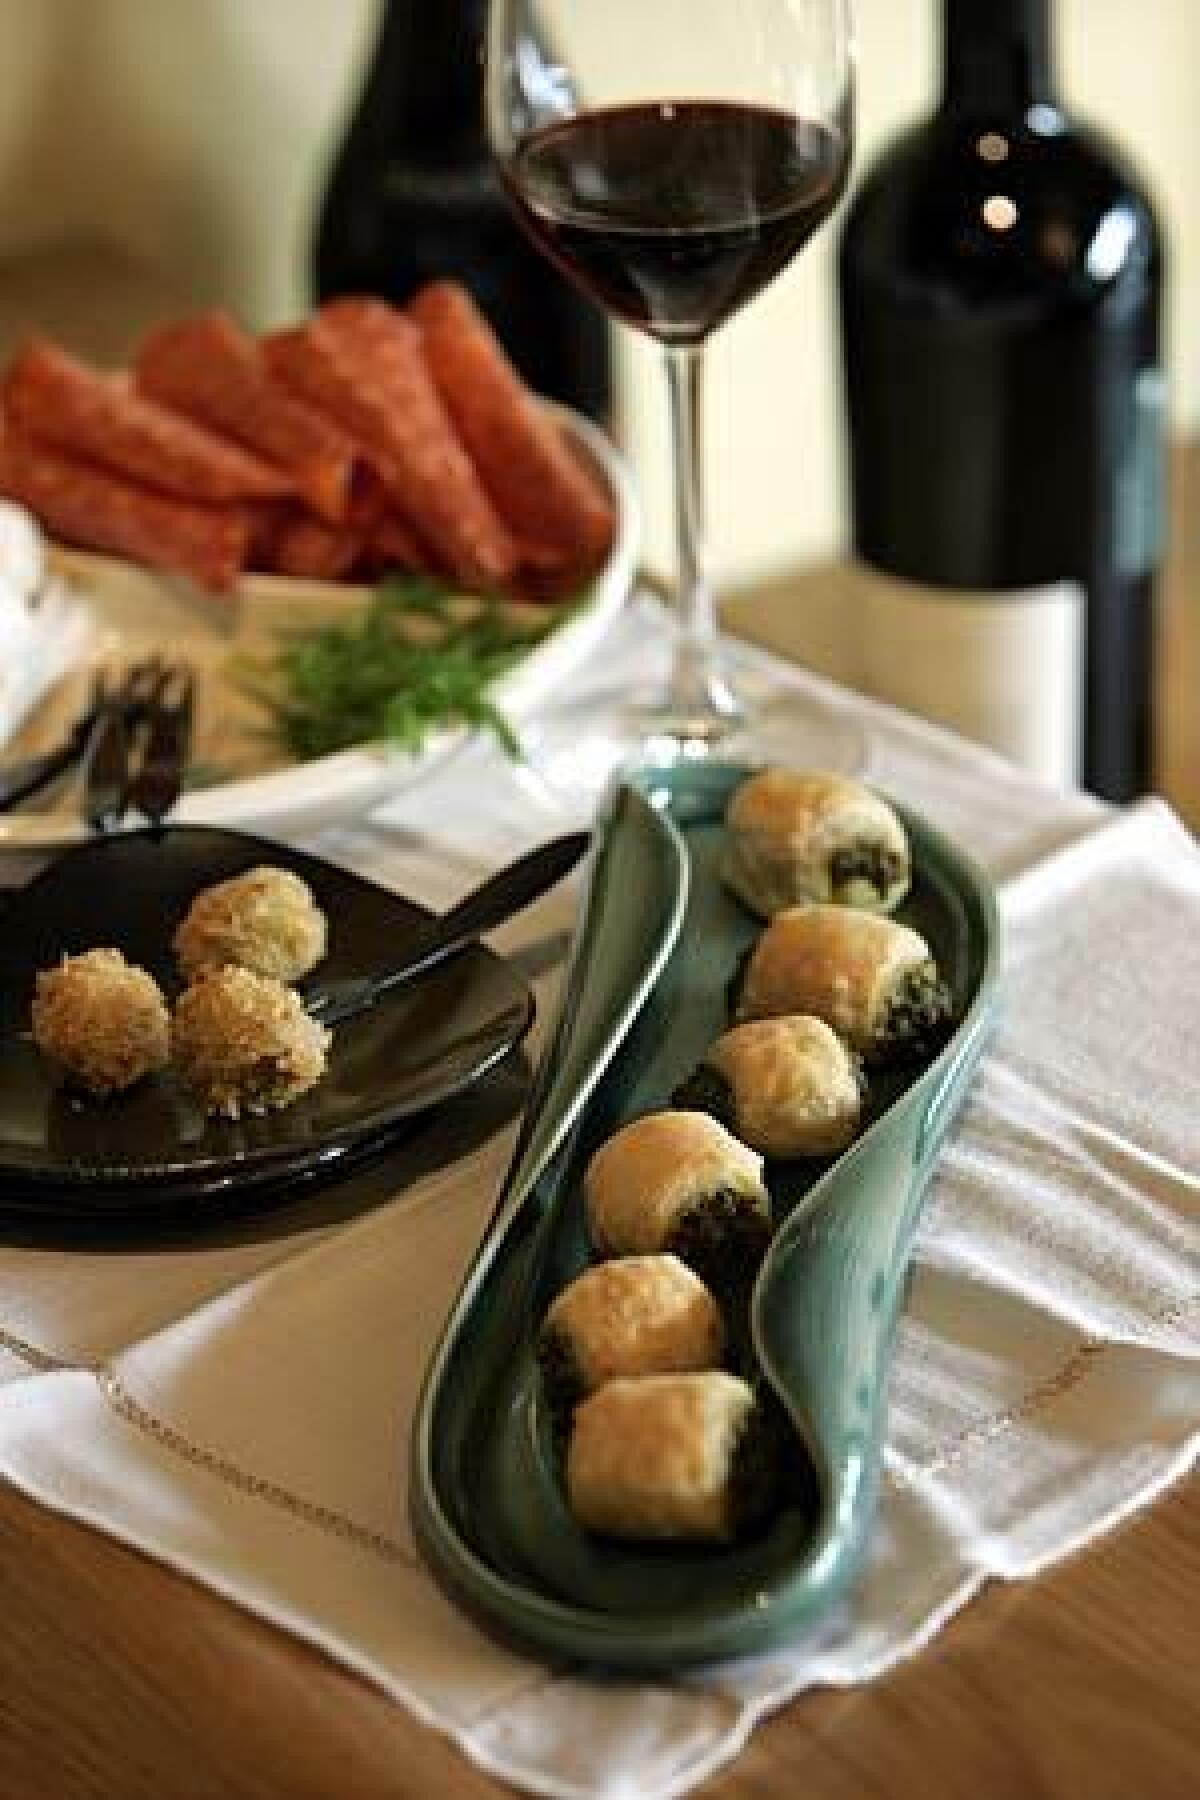 Aperitivo is all about delicious bites that are easy to fix and go well with drinks. Tuck hazelnut pesto into puff pastry; stuff olives with soppressata and Fontina, then bread and fry them; turn creamy risotto into crisp little squares.